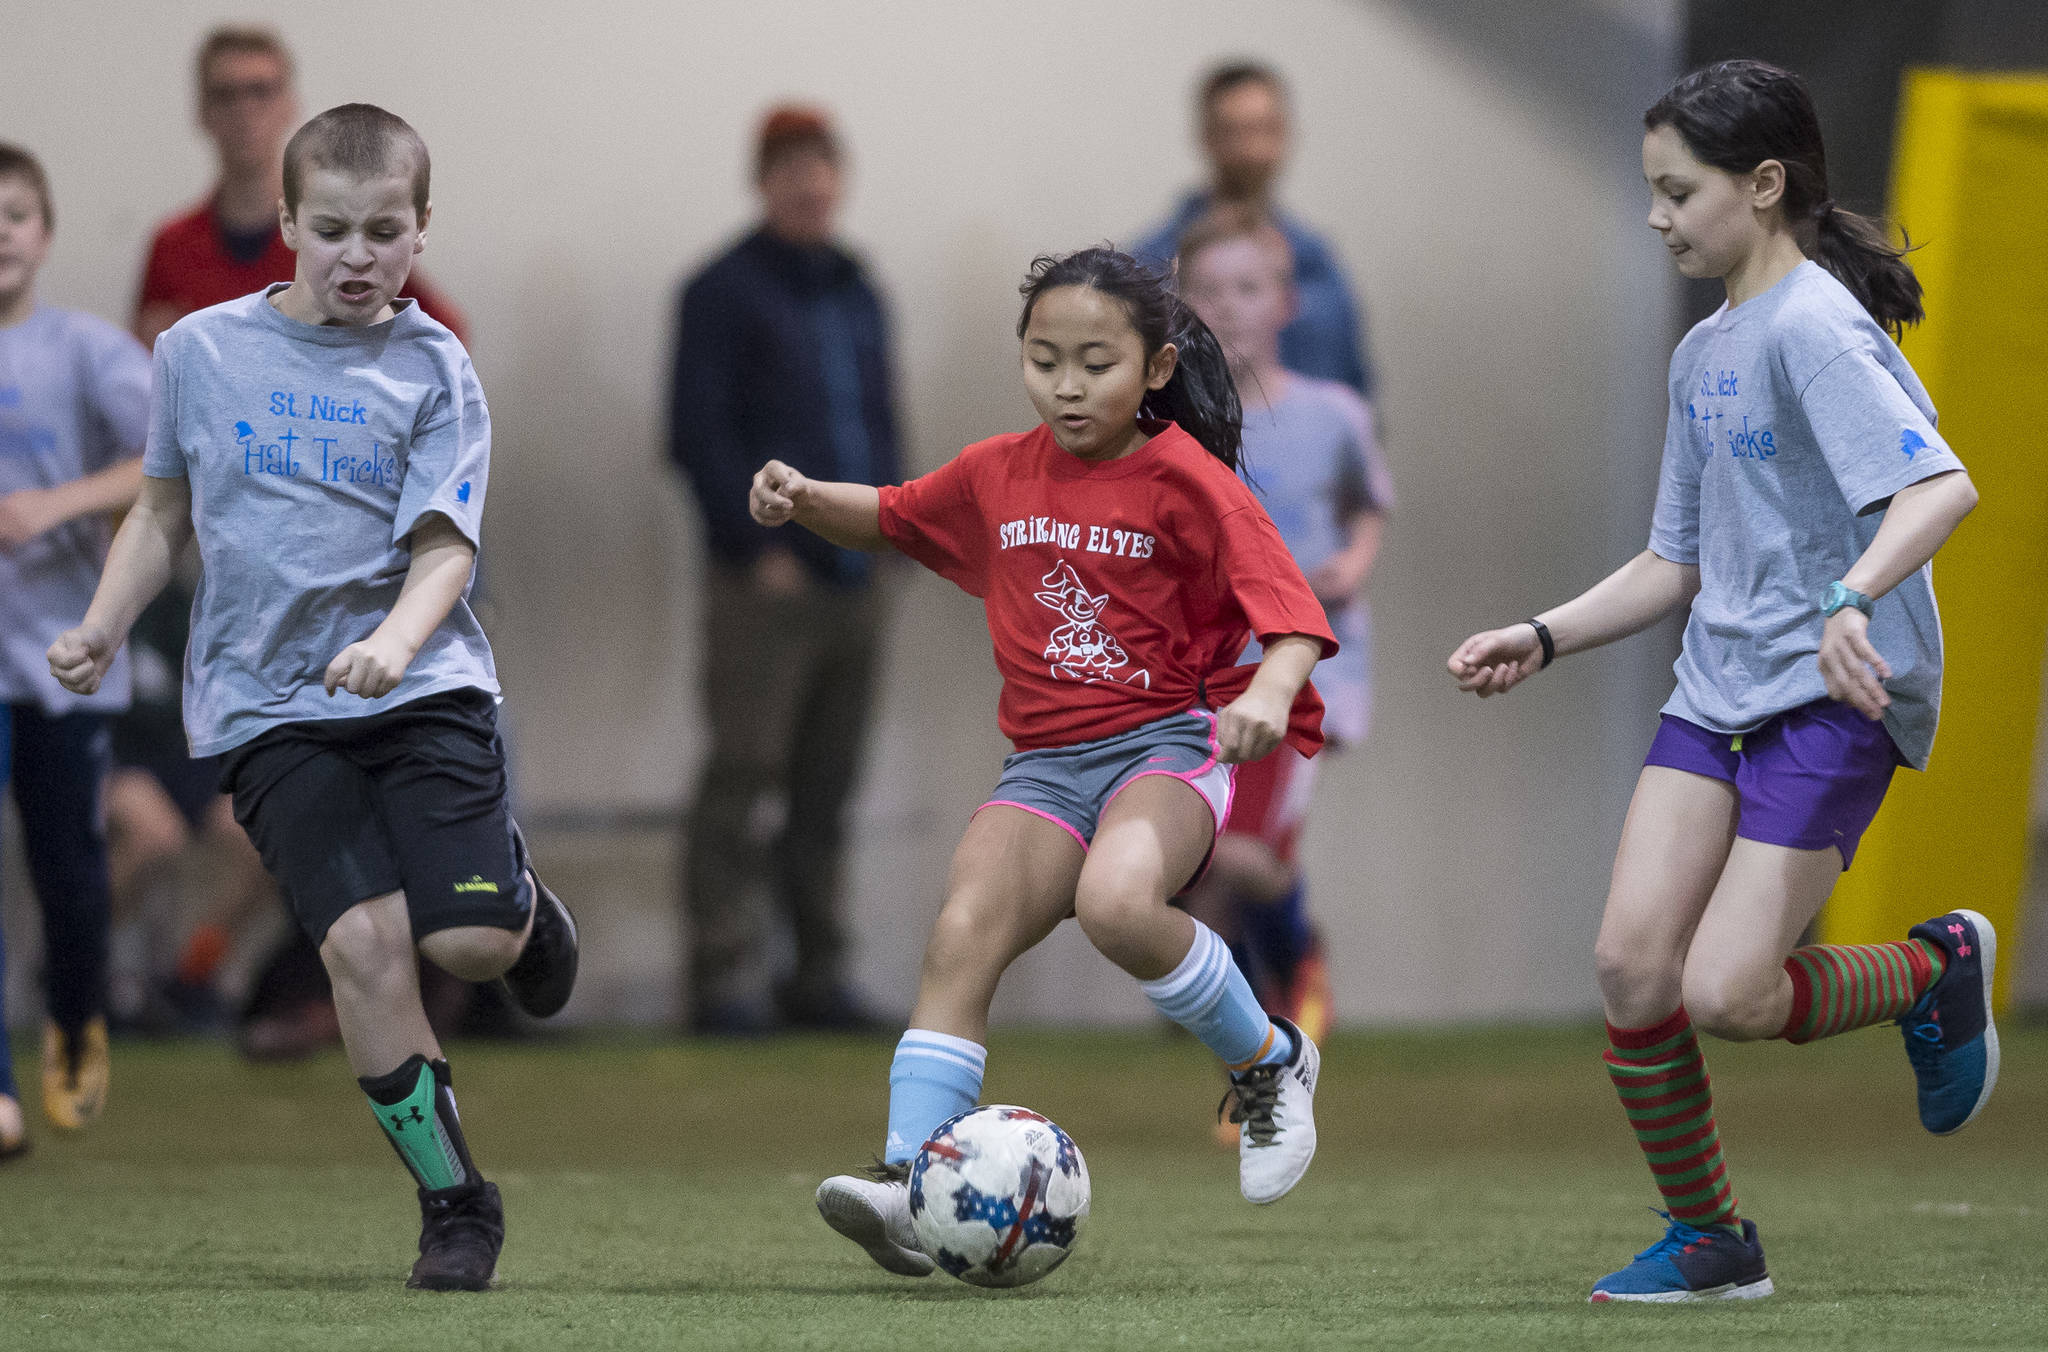 Striking Elves play against the St. Nick Hat Tricks at the Holiday Cup Soccer Tournament in the Well Fargo Dimond Park Field House on Friday, Dec. 22, 2017. The Holiday Cup is underway again now through New Years Eve with 400 players on 30 different teams. (Michael Penn | Juneau Empire File)